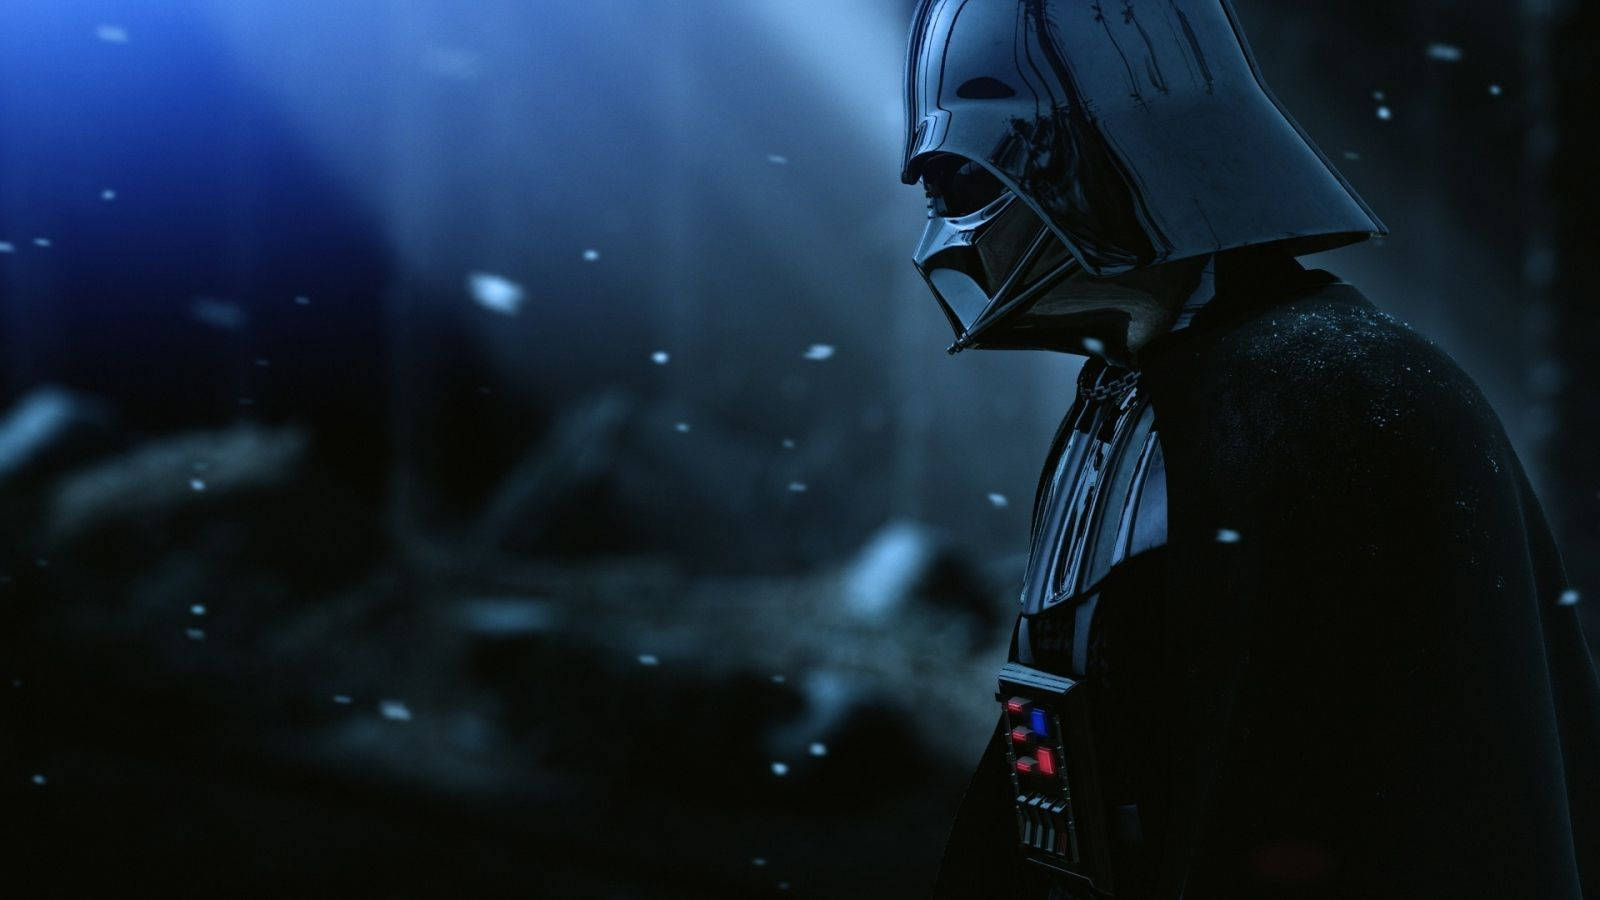 Darth Vader, The Most Powerful Villain of the Star Wars Franchise Wallpaper